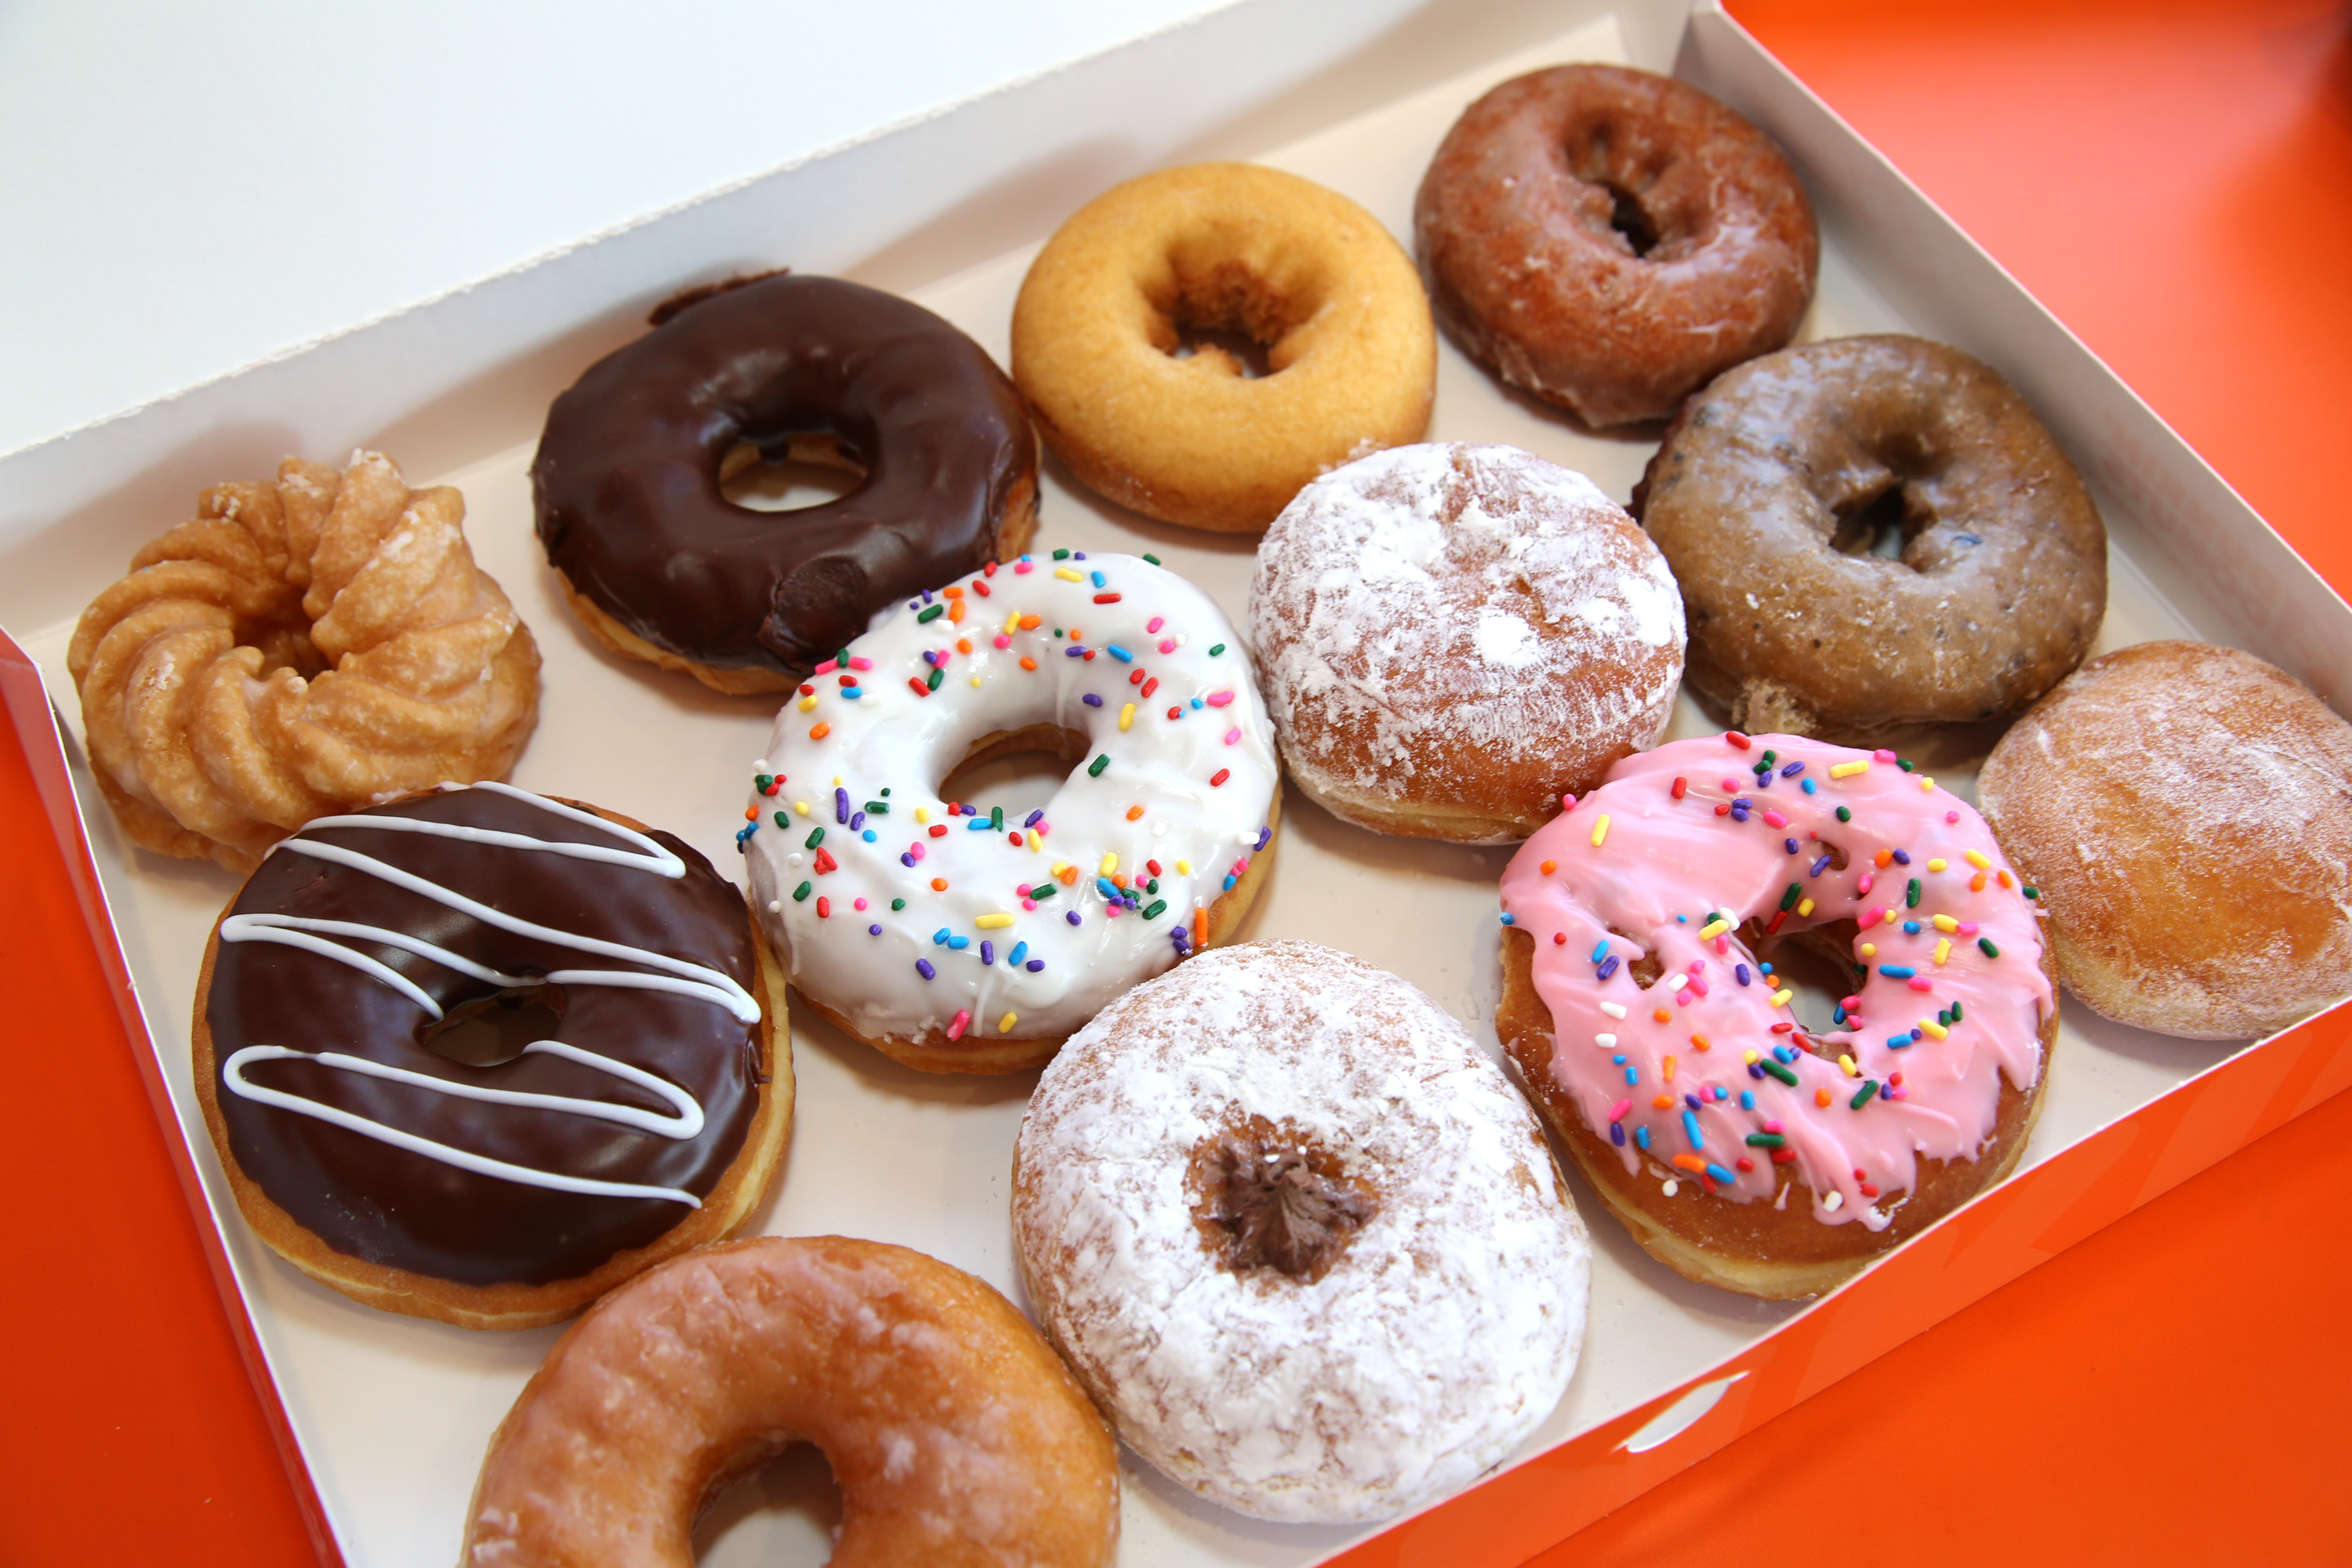 (credit: Rachel Murray/Getty Images for Dunkin' Donuts)